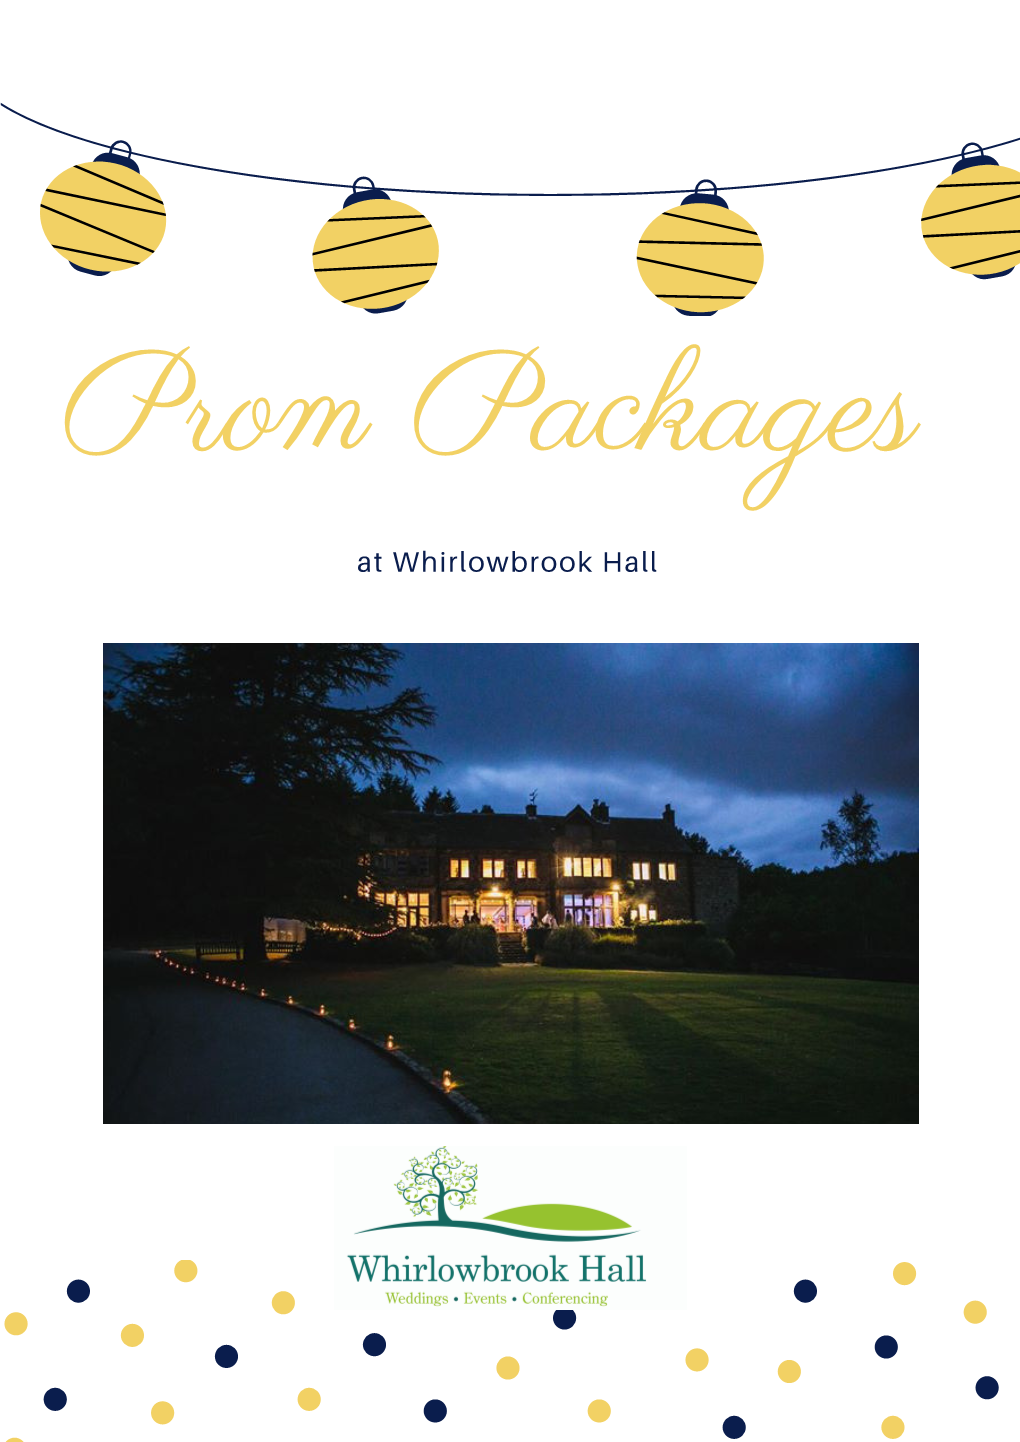 Our Prom Packages Which Are Available on Selected Dates Throughout the Year